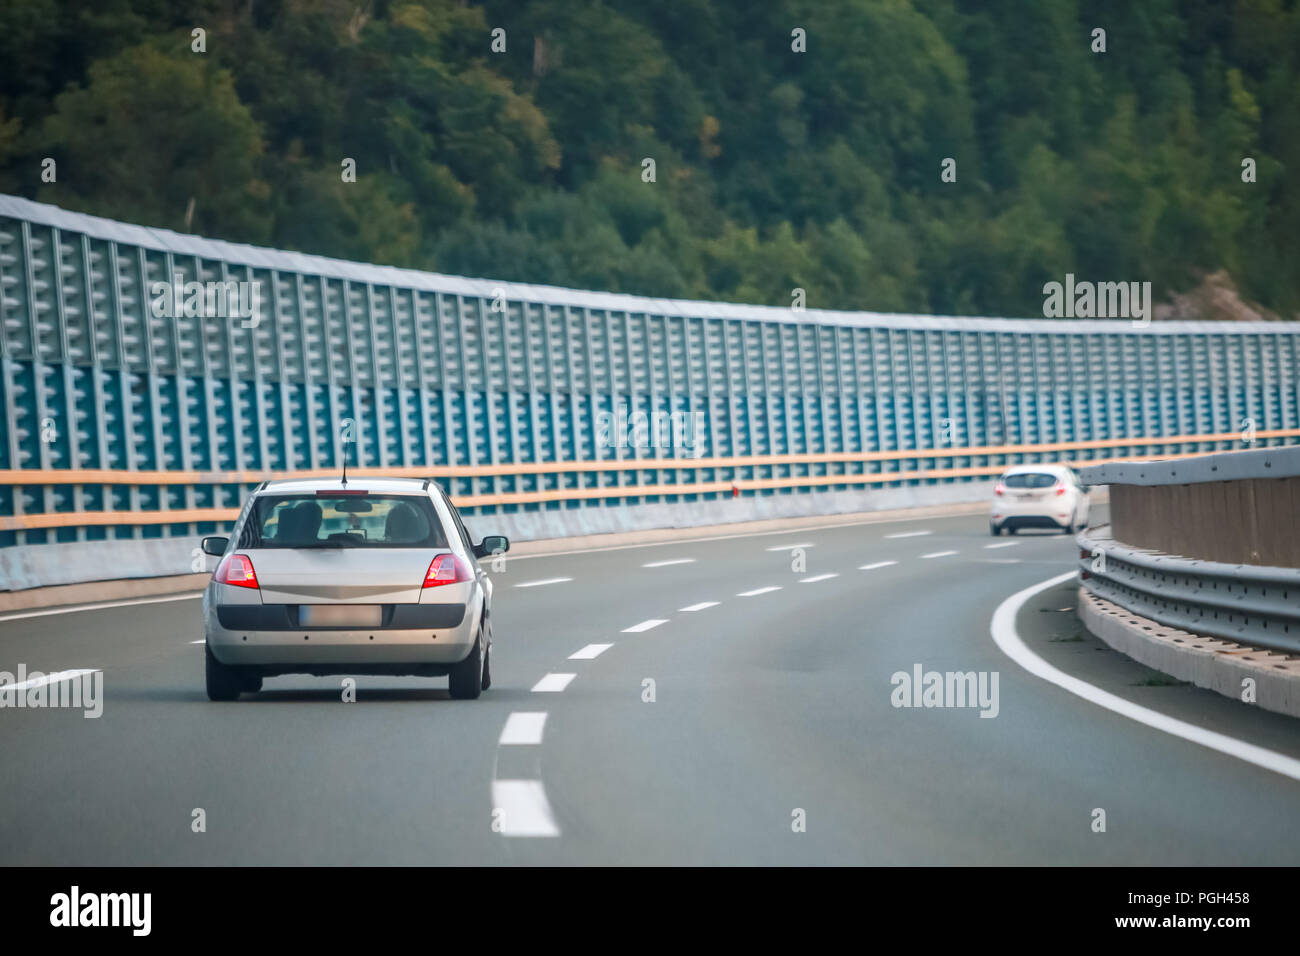 Rear view of car driving on the highway with noise barrier. Stock Photo